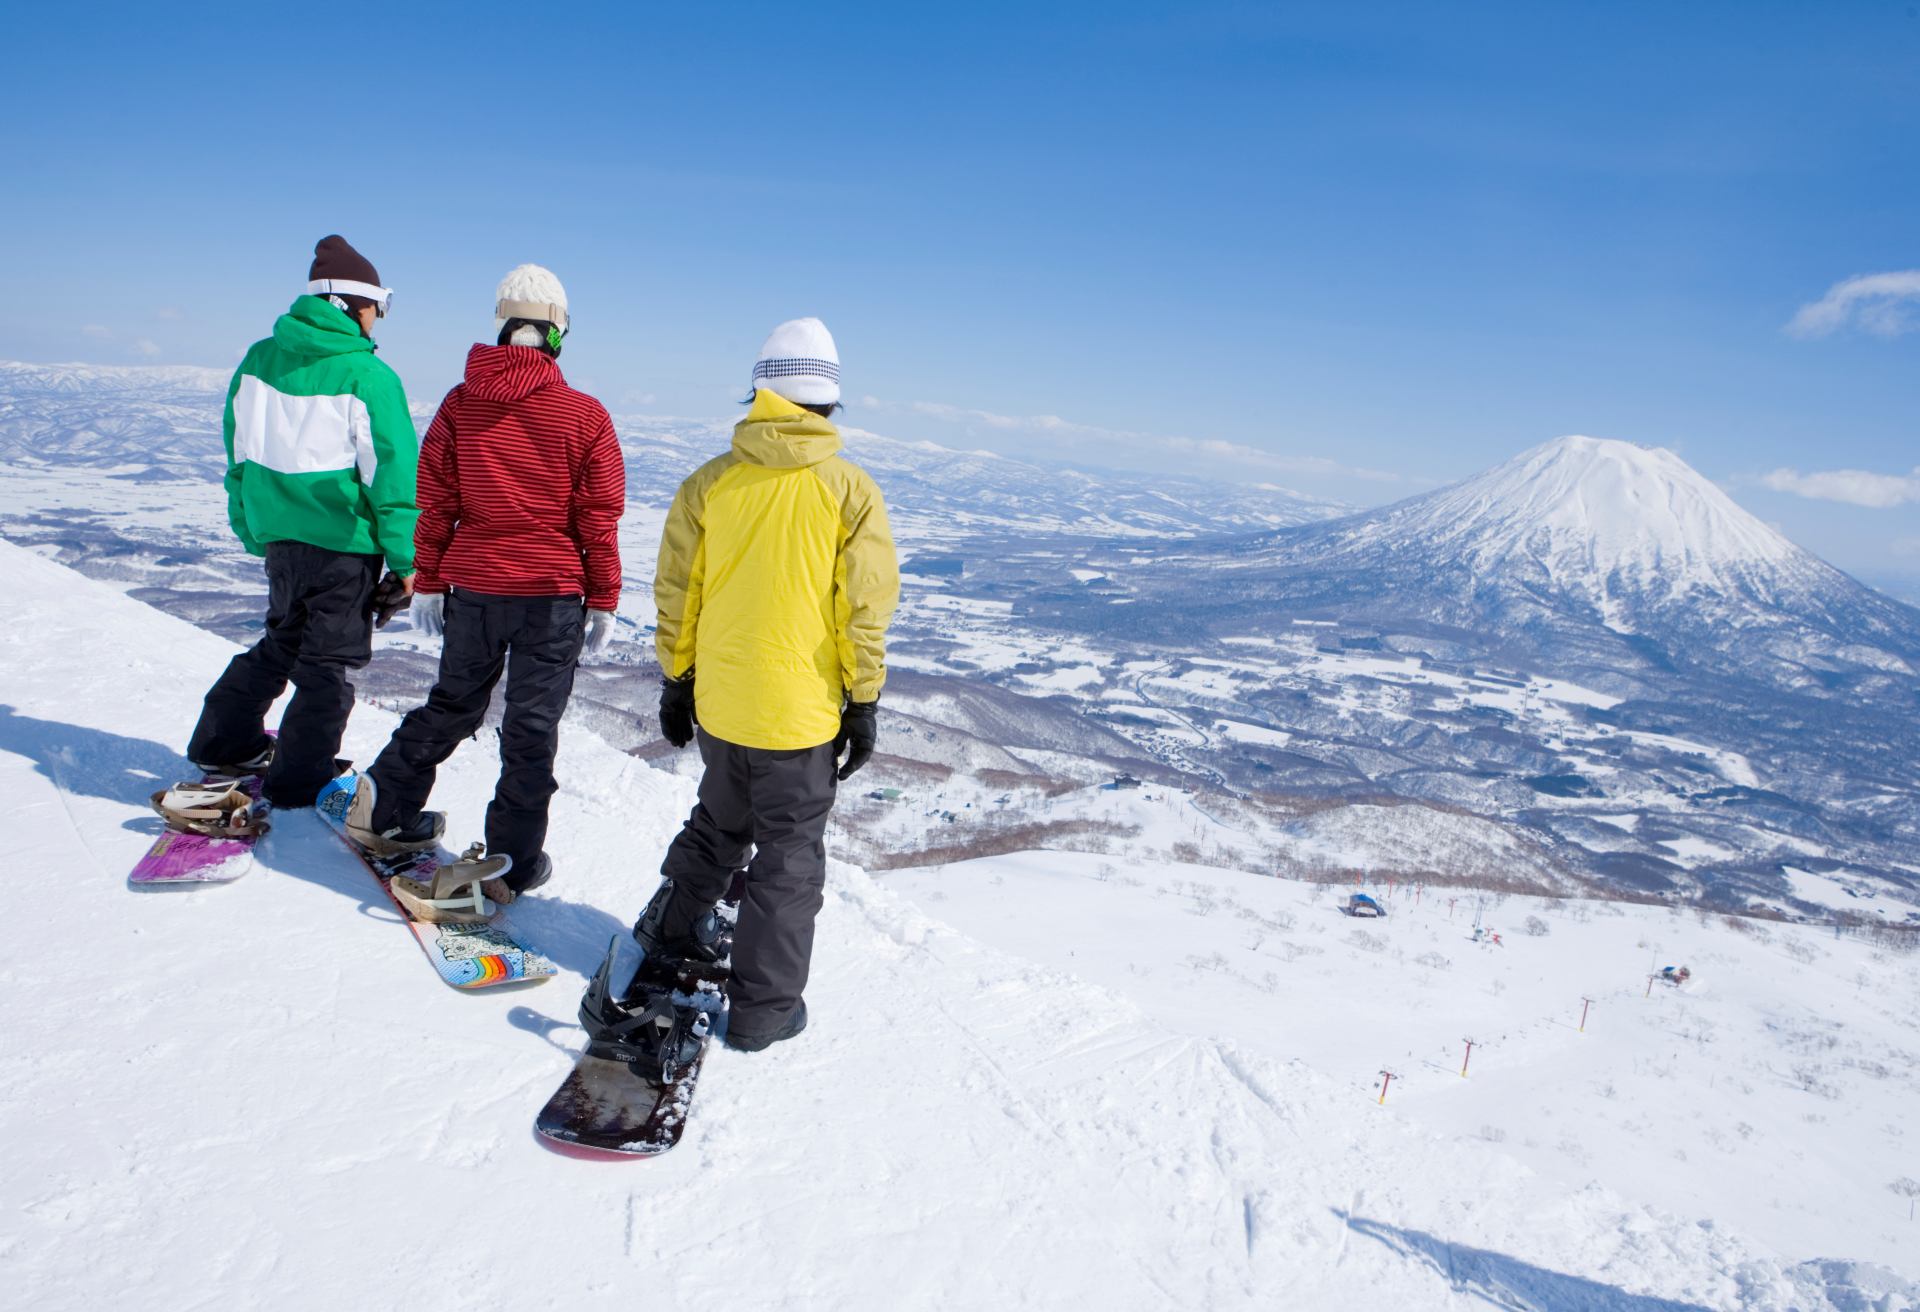 Three snowboarders on edge of slope, rear view